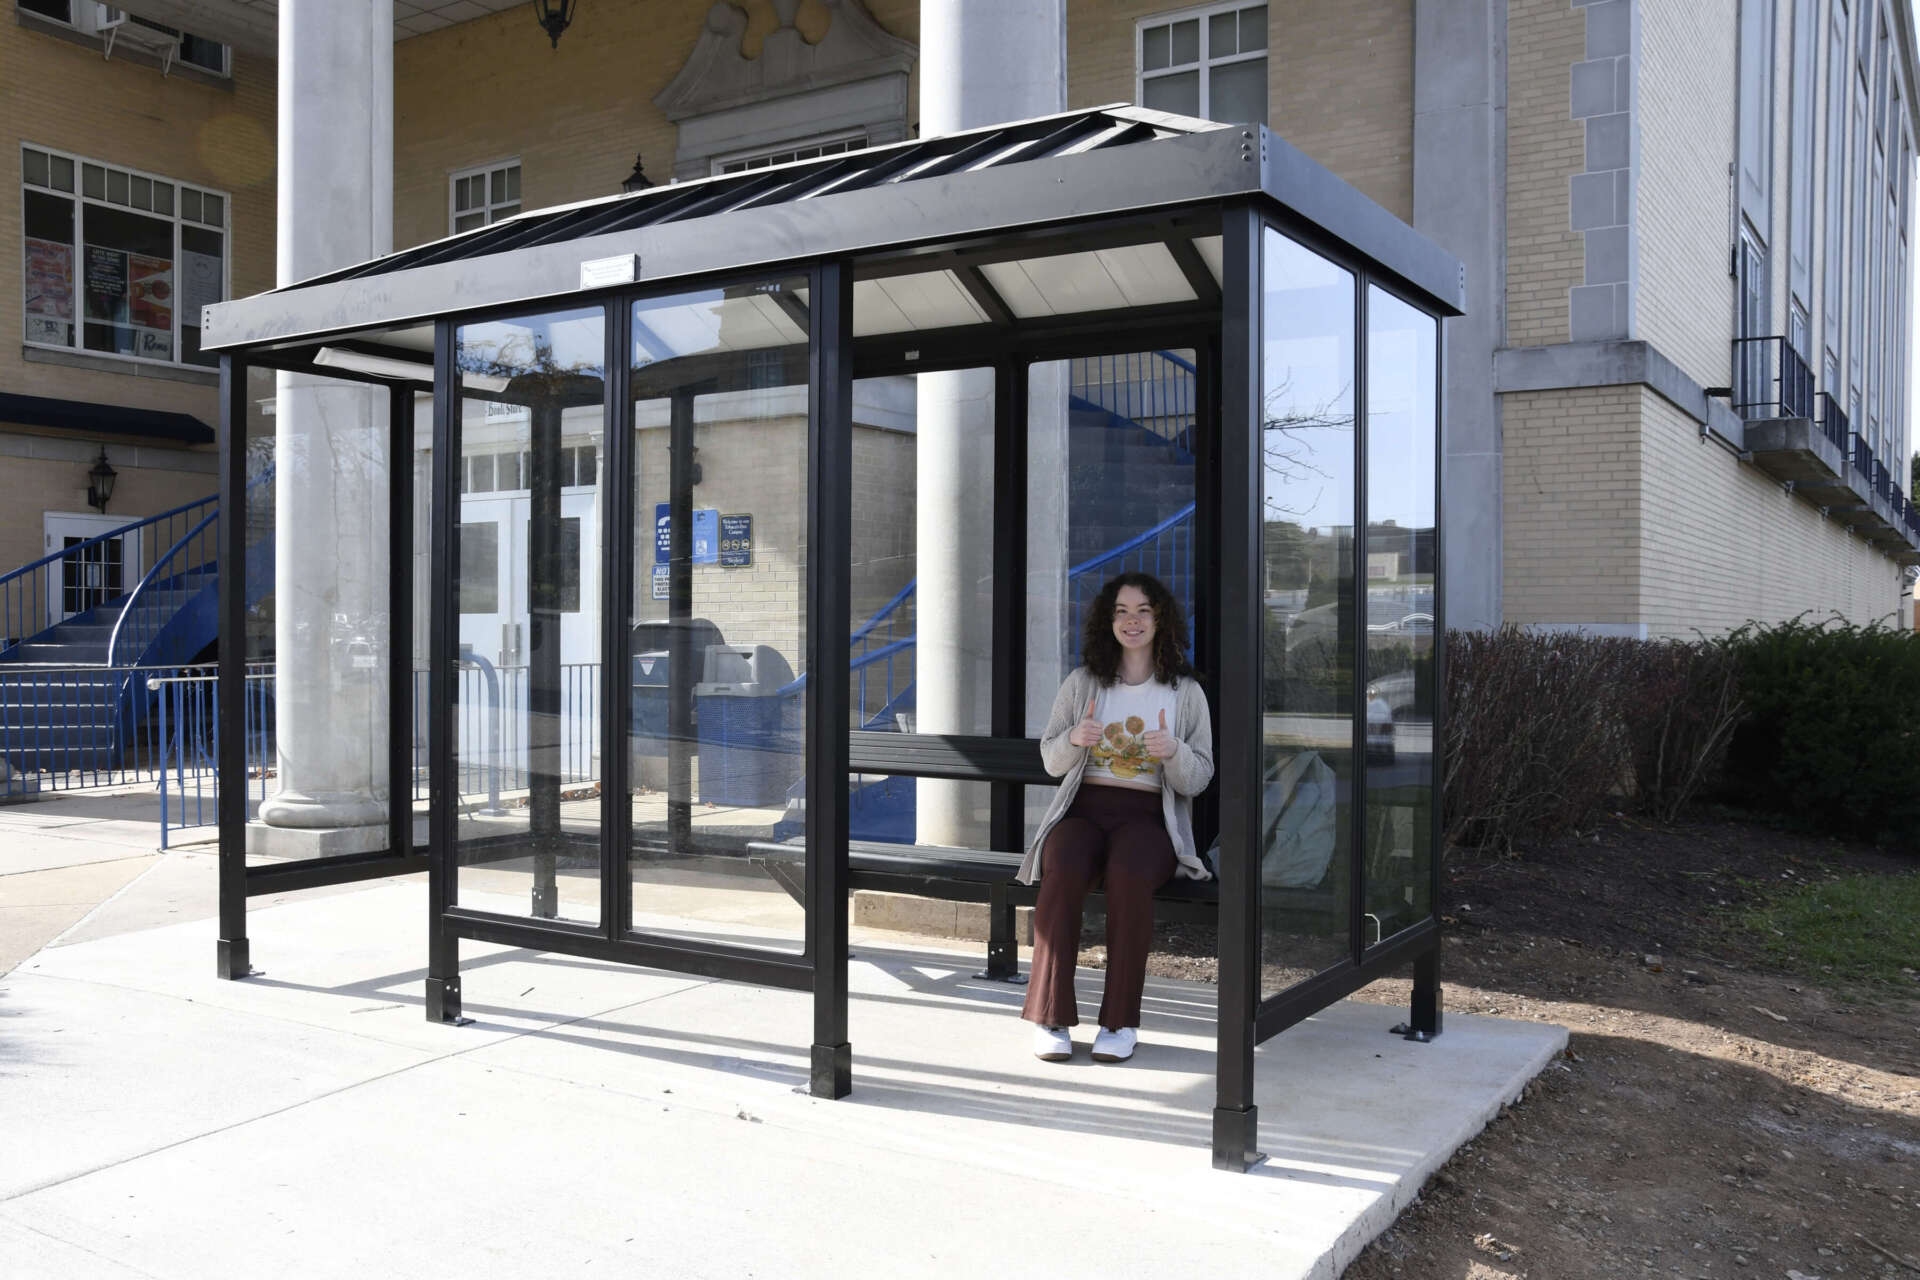 Student sitting in the new bus shelter giving a thumbs up.